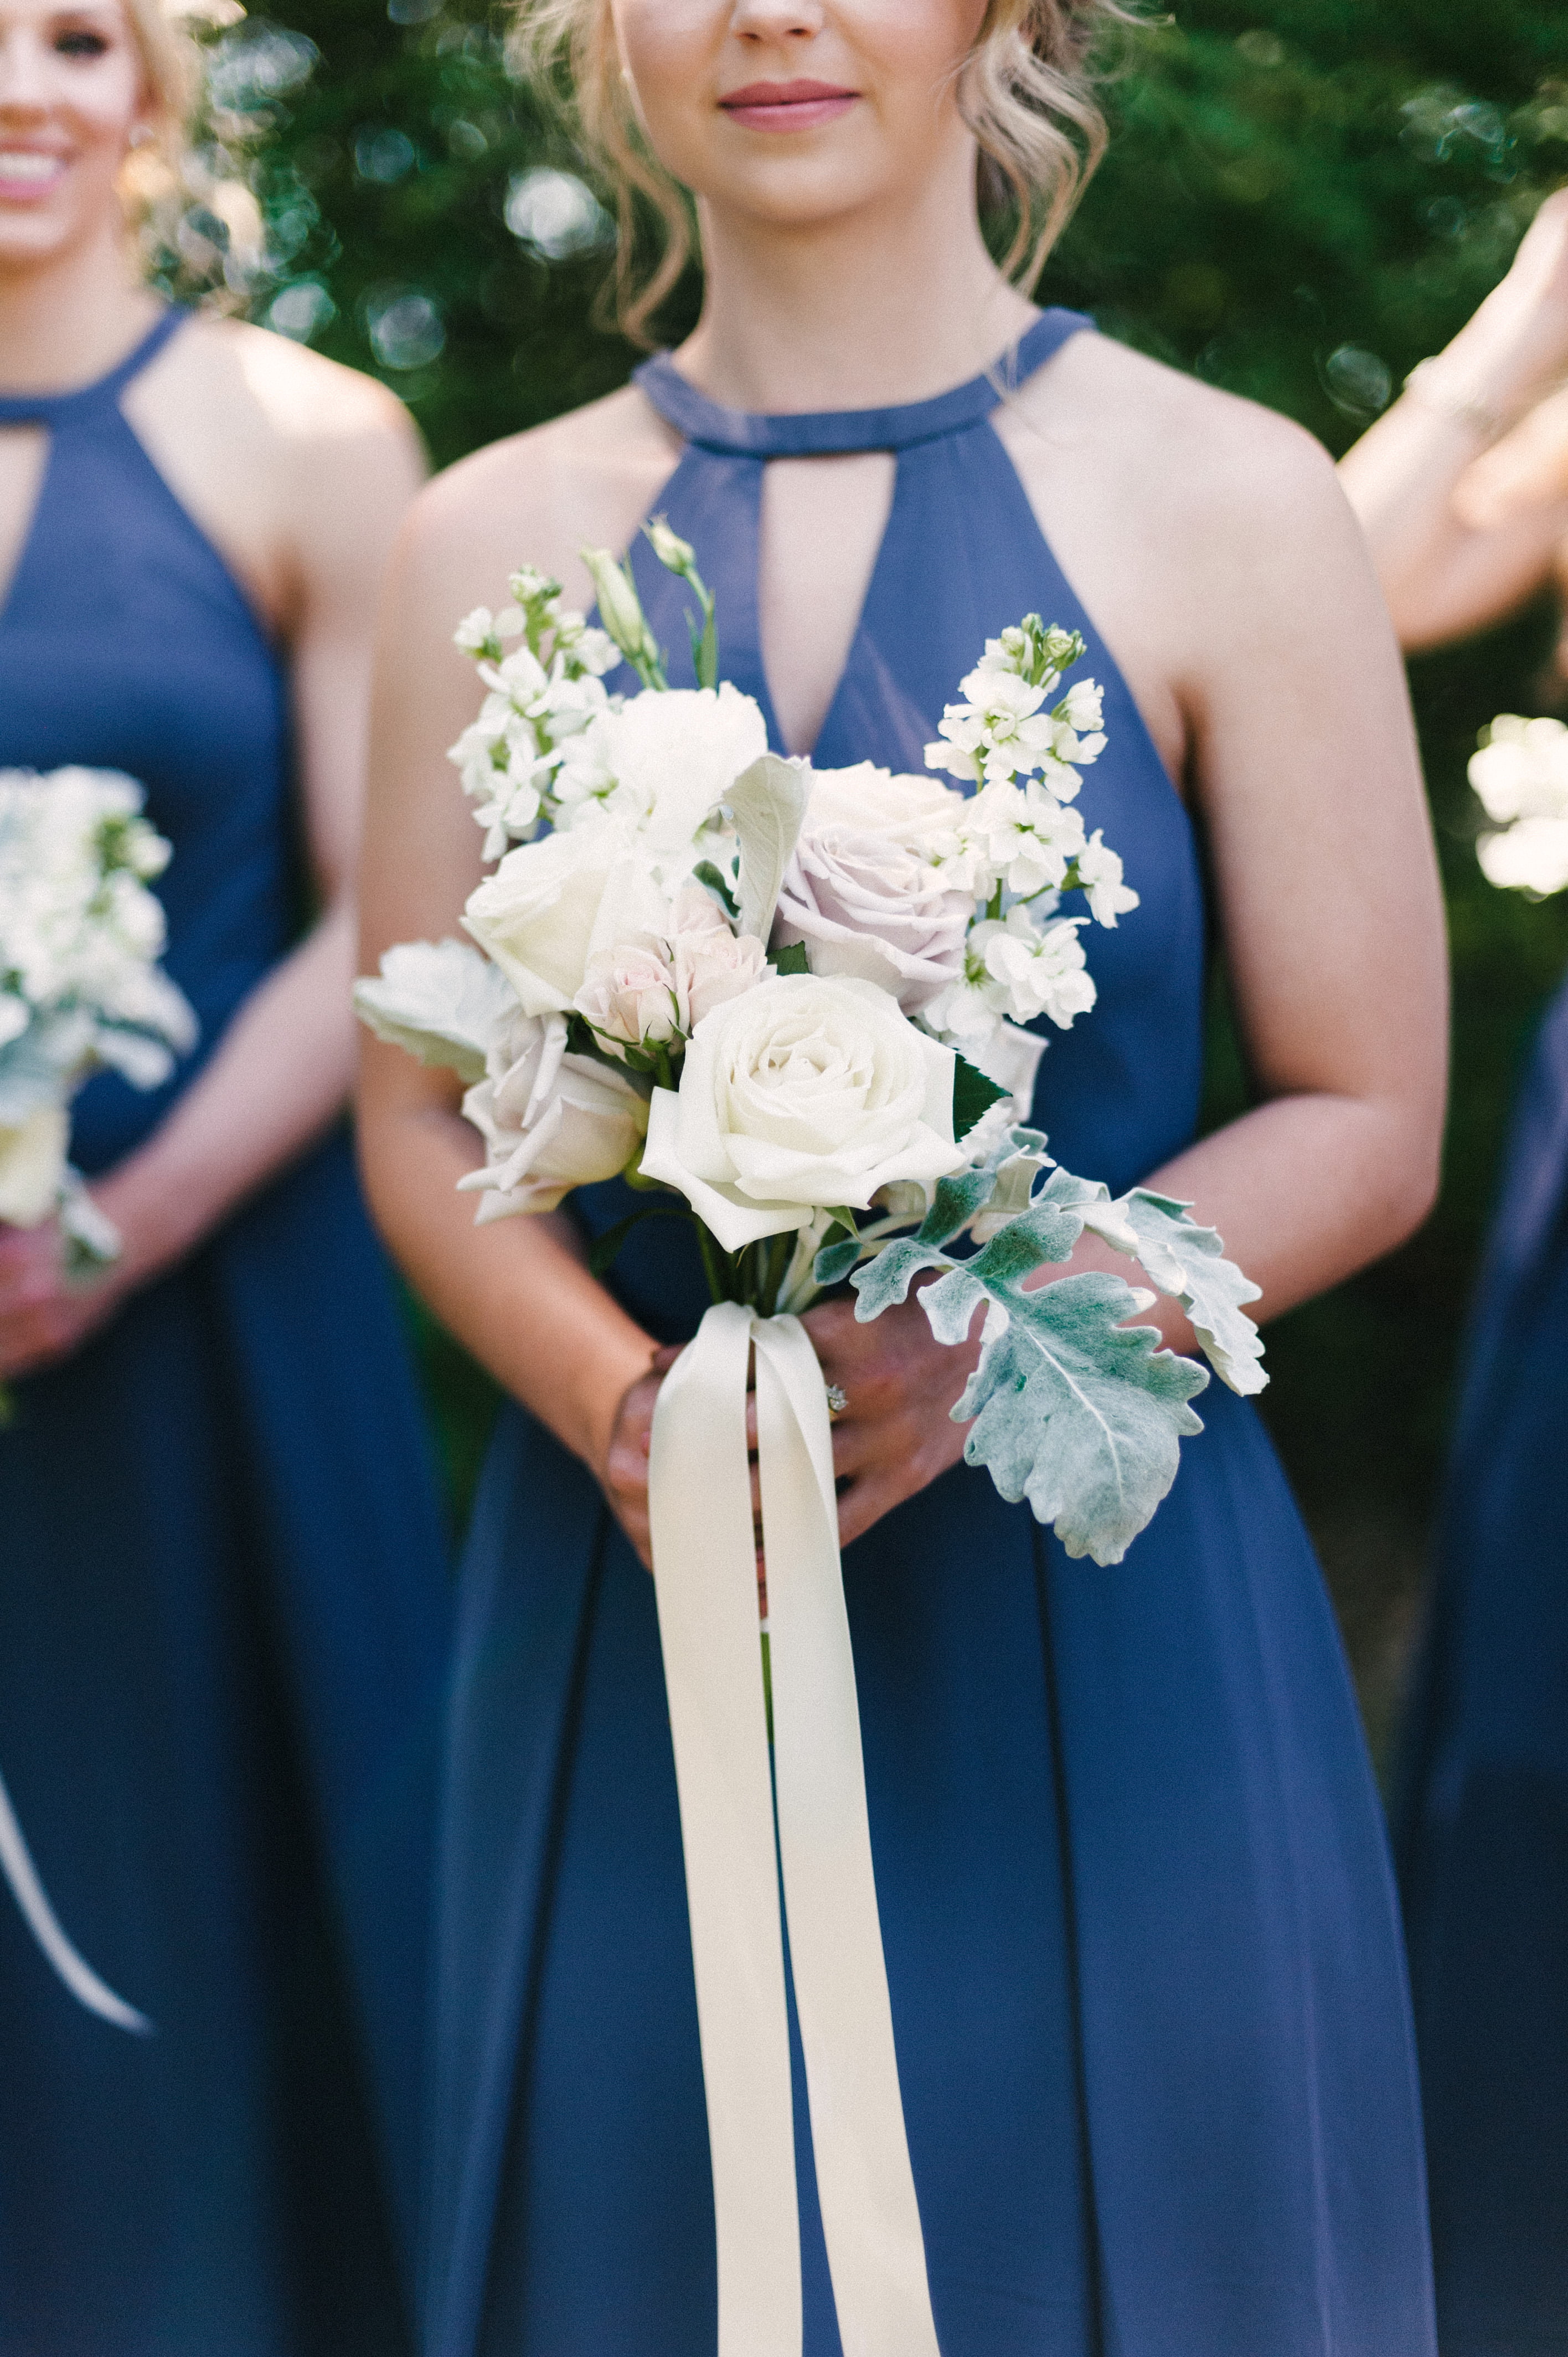 Stunning bridesmaid holding ethereal bouquets with long ribbon for a timeless wedding in Selma, AL